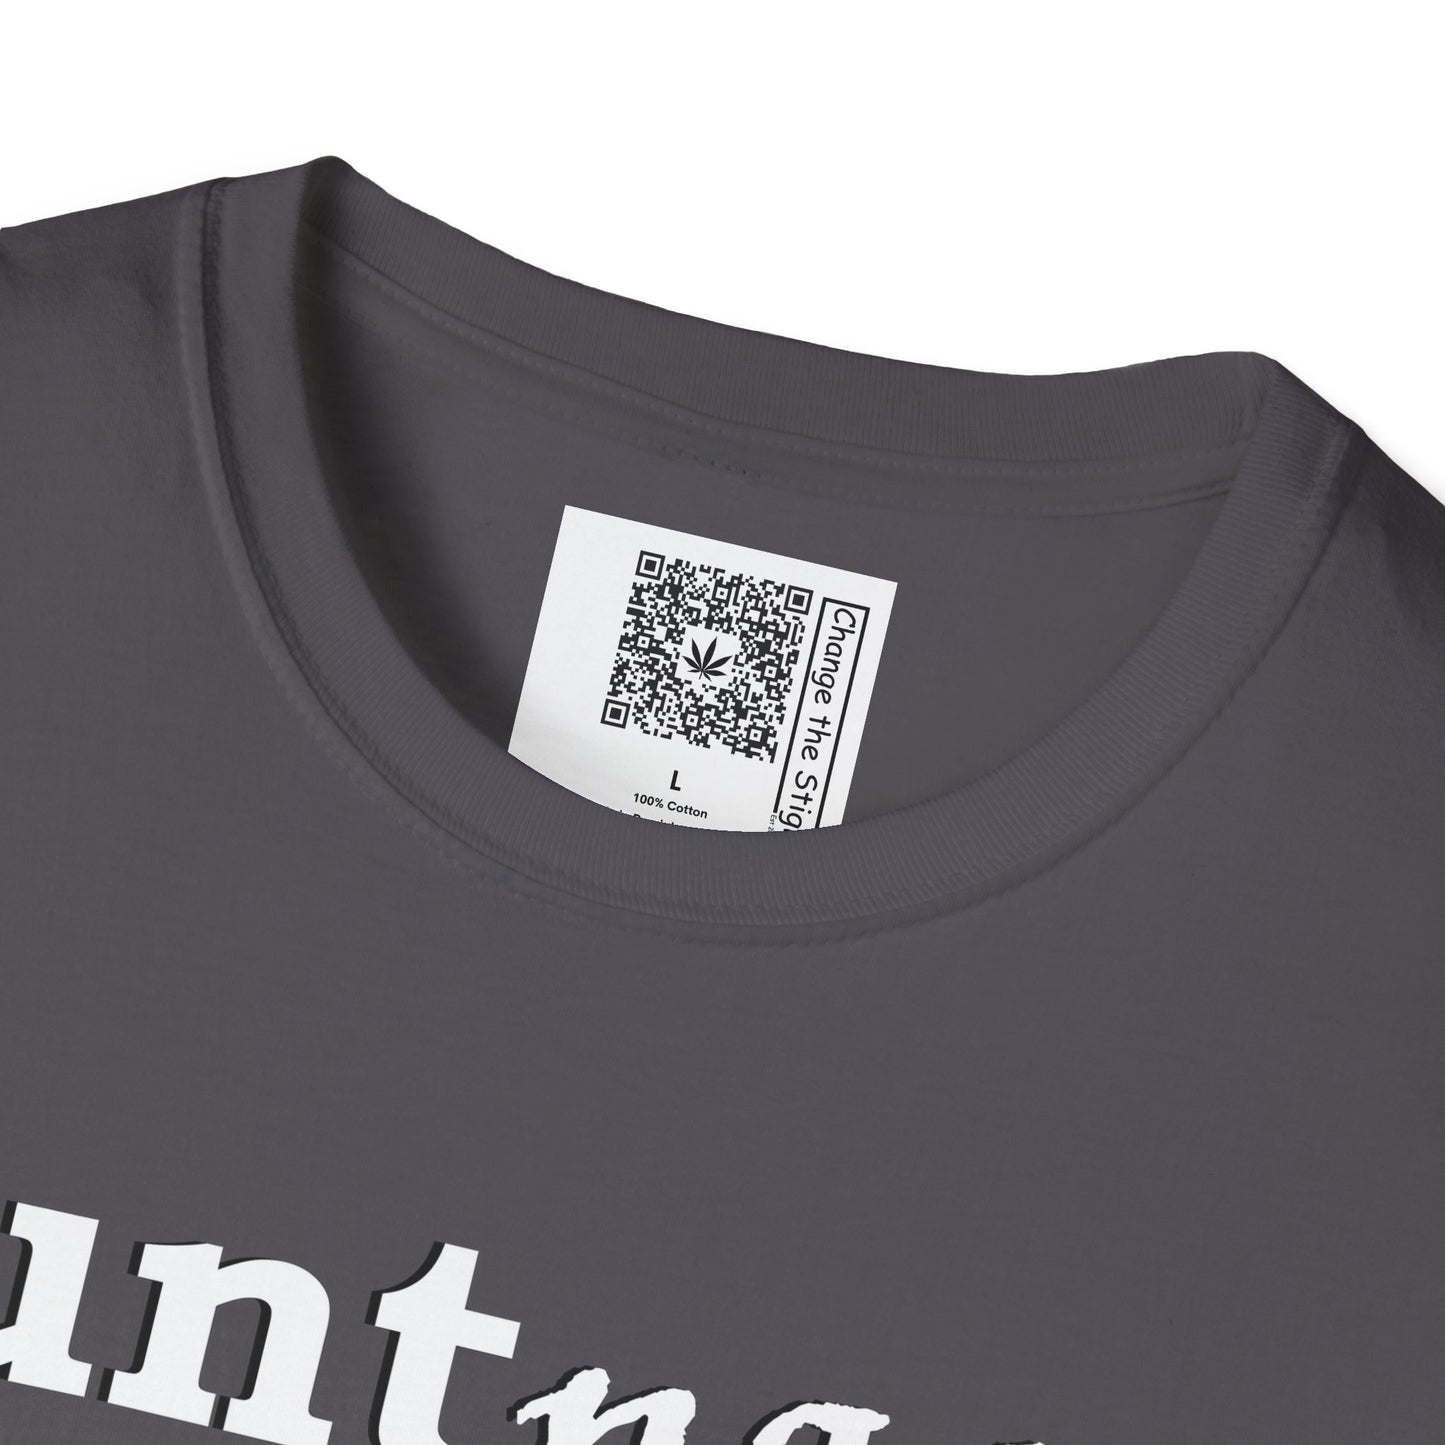 Change the Stigma, Charcoal color, shirt saying "blunt passer", Shirt is open displayed, Qr code is shown neck tag